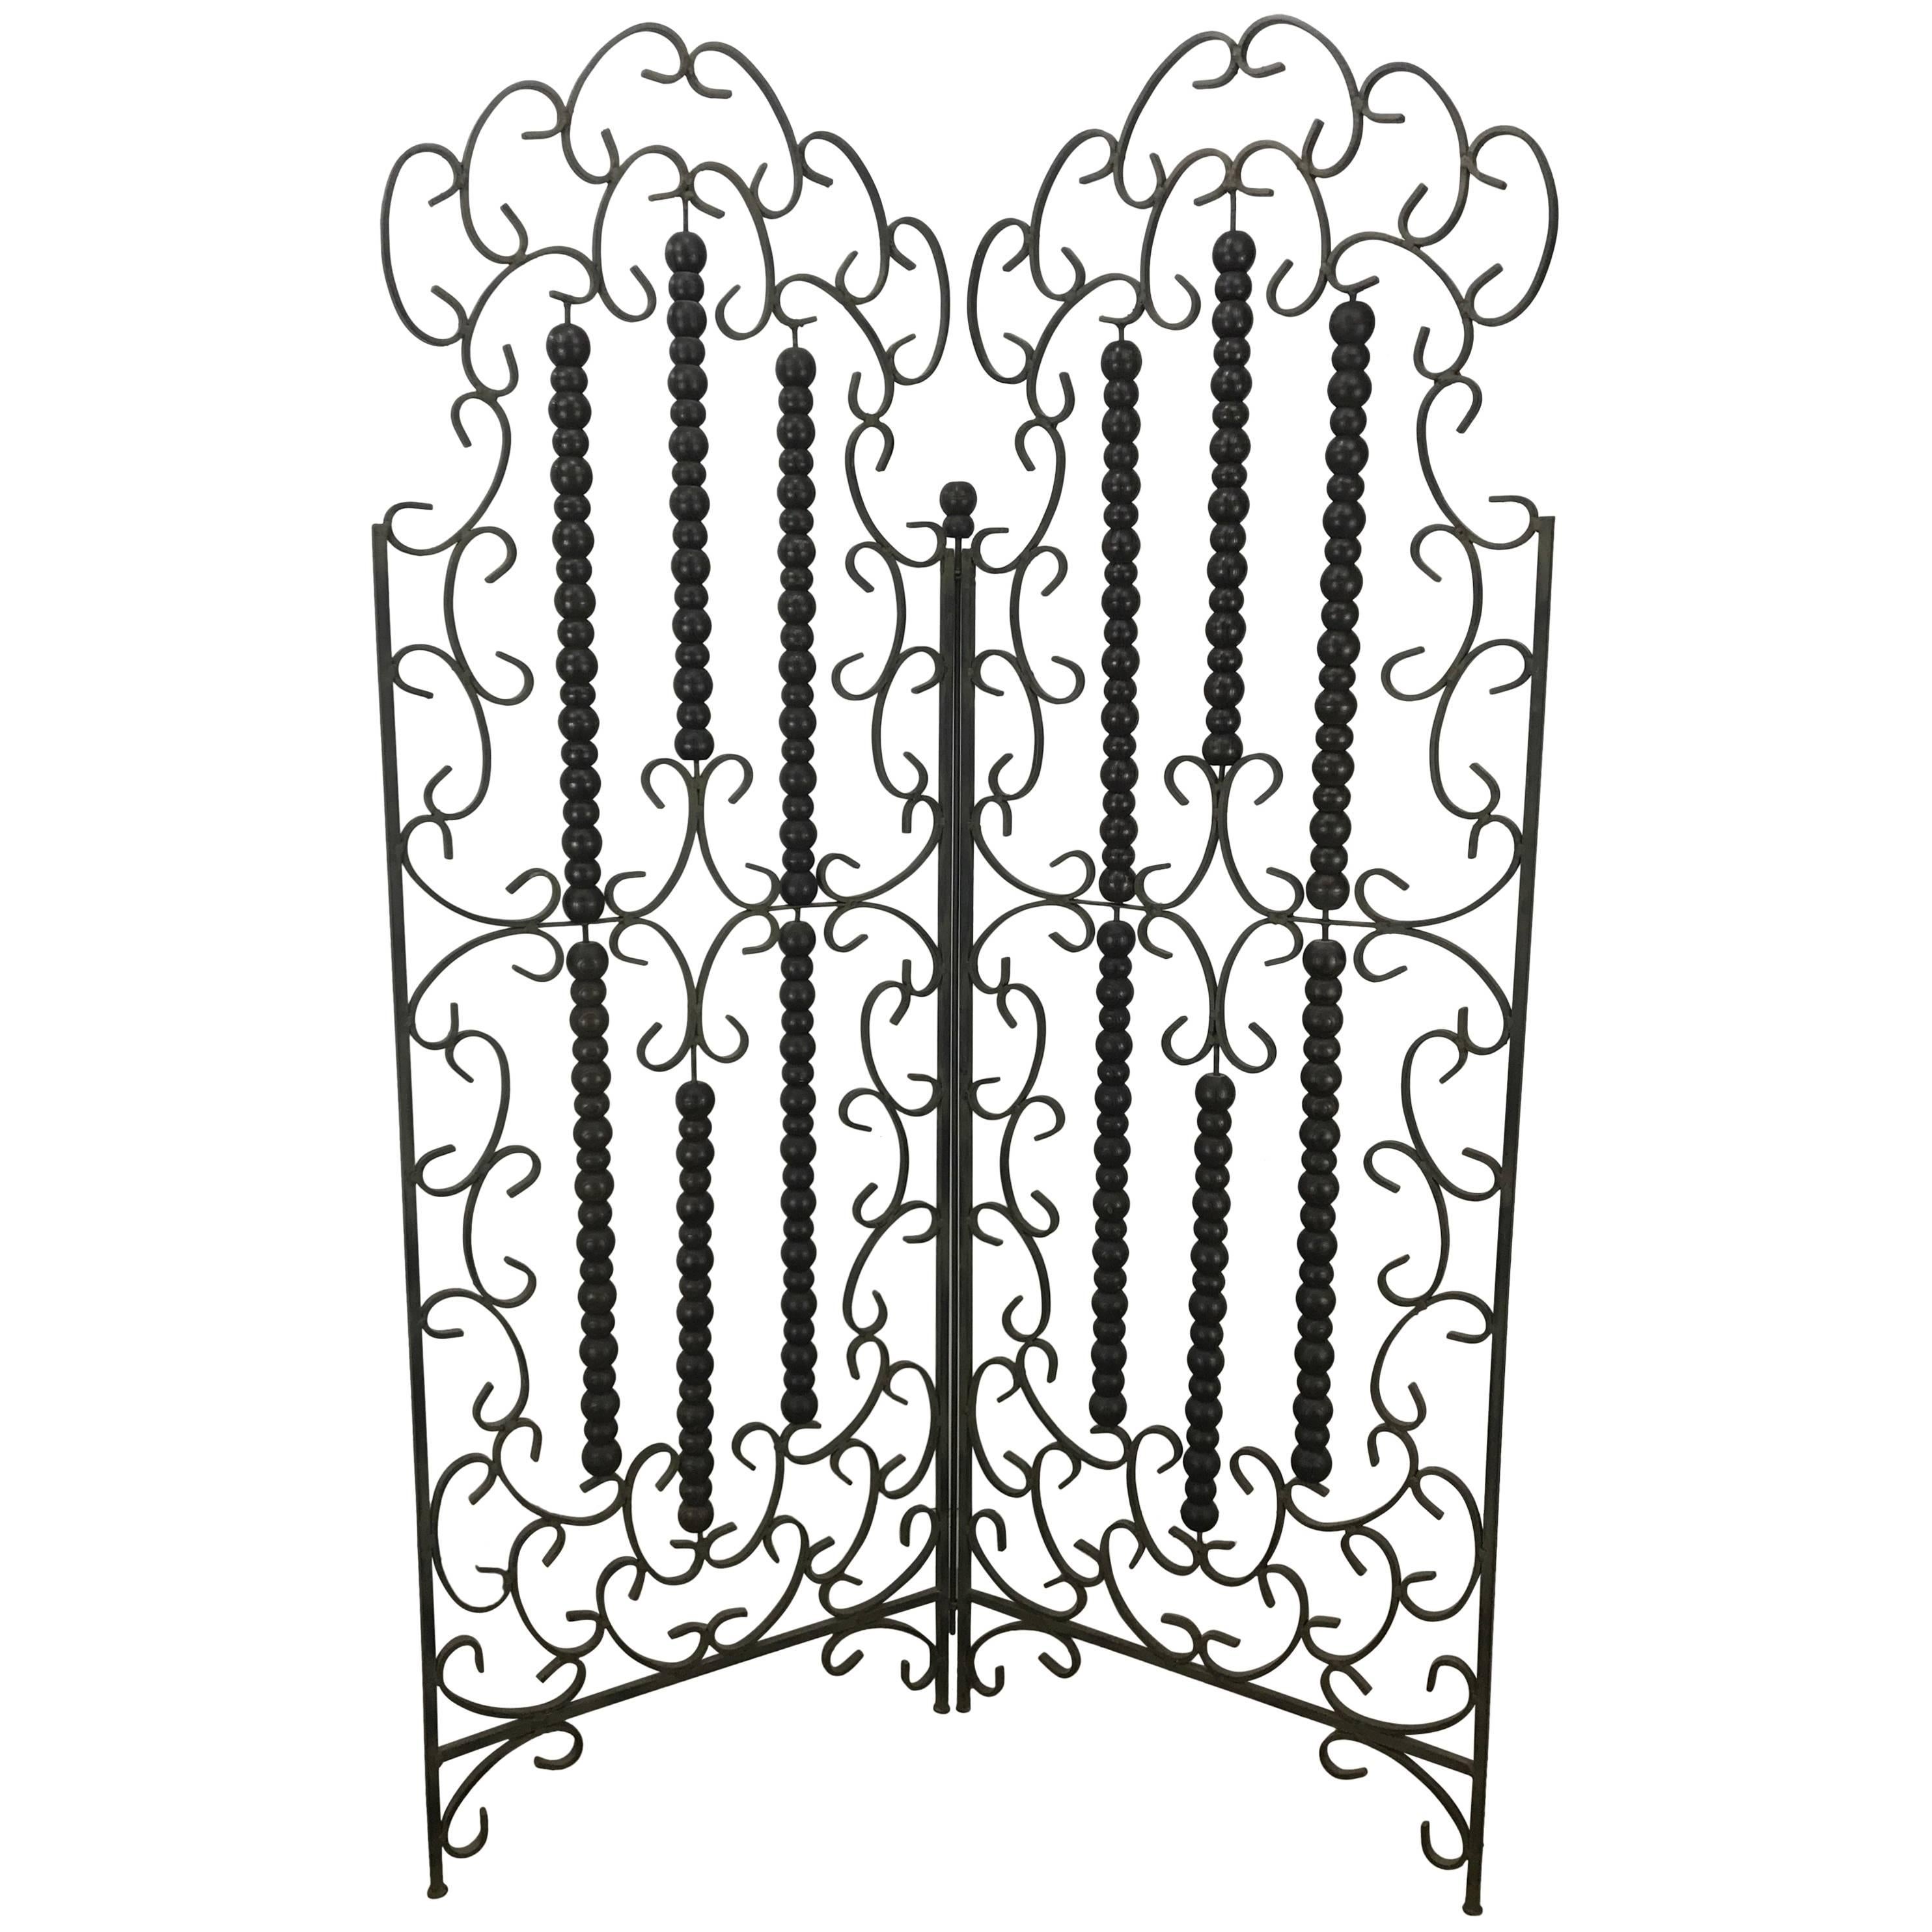 Wrought Iron and Wood Mediterranean Modern Folding Screen or Divider